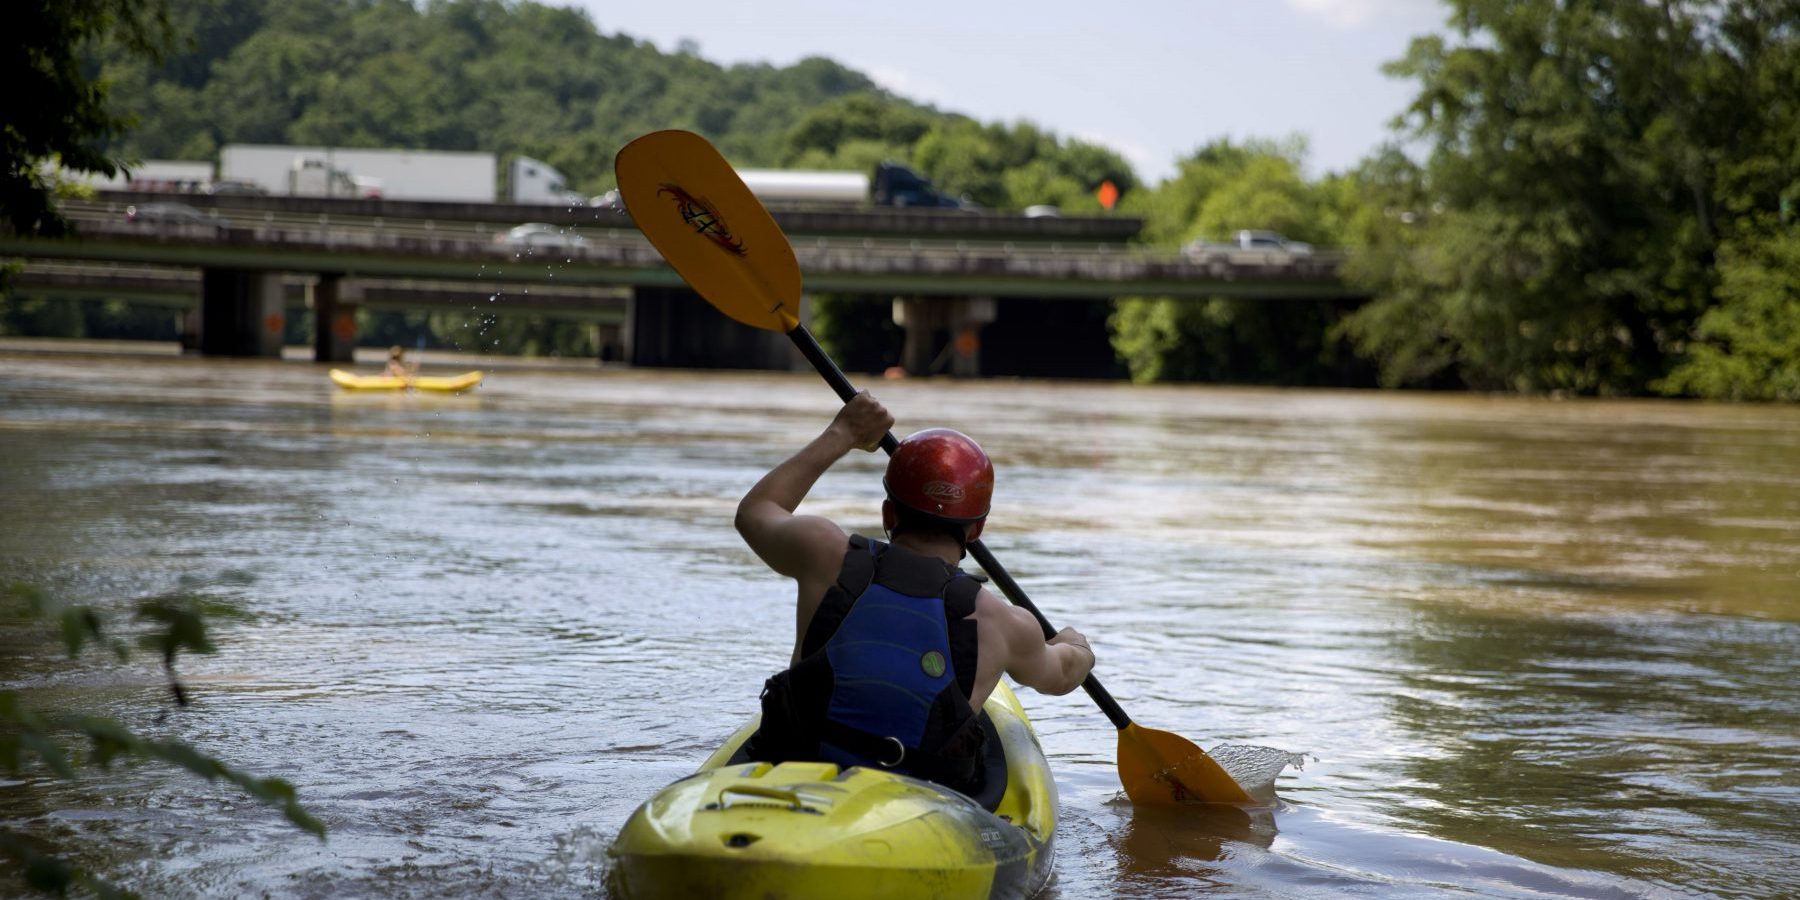 The Chattahoochee River, the main source of water for the metro Atlanta area, is also involved in this litigation, though the water suppliers in the area have worked to become more efficient and reduce per capita water use. (David Goldman/Associated Press file)